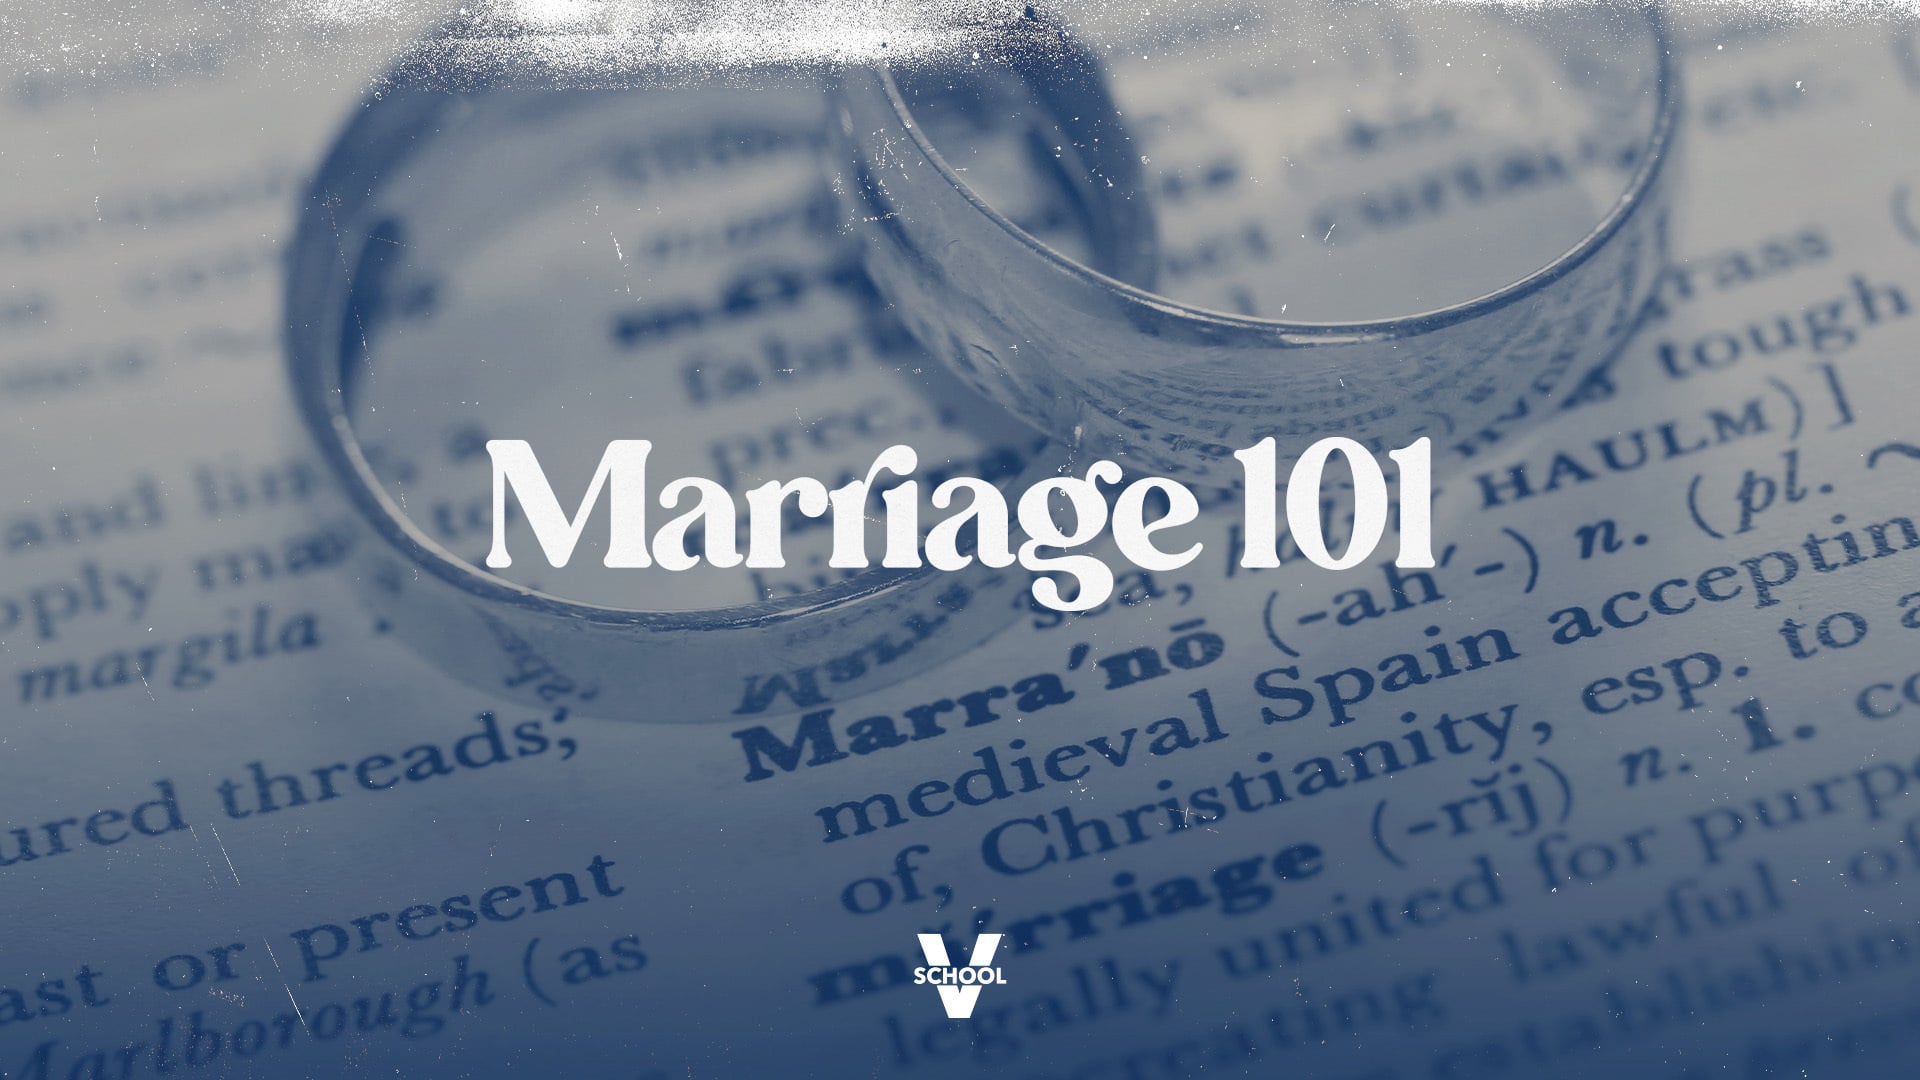 Featured Image for “Marriage 101”